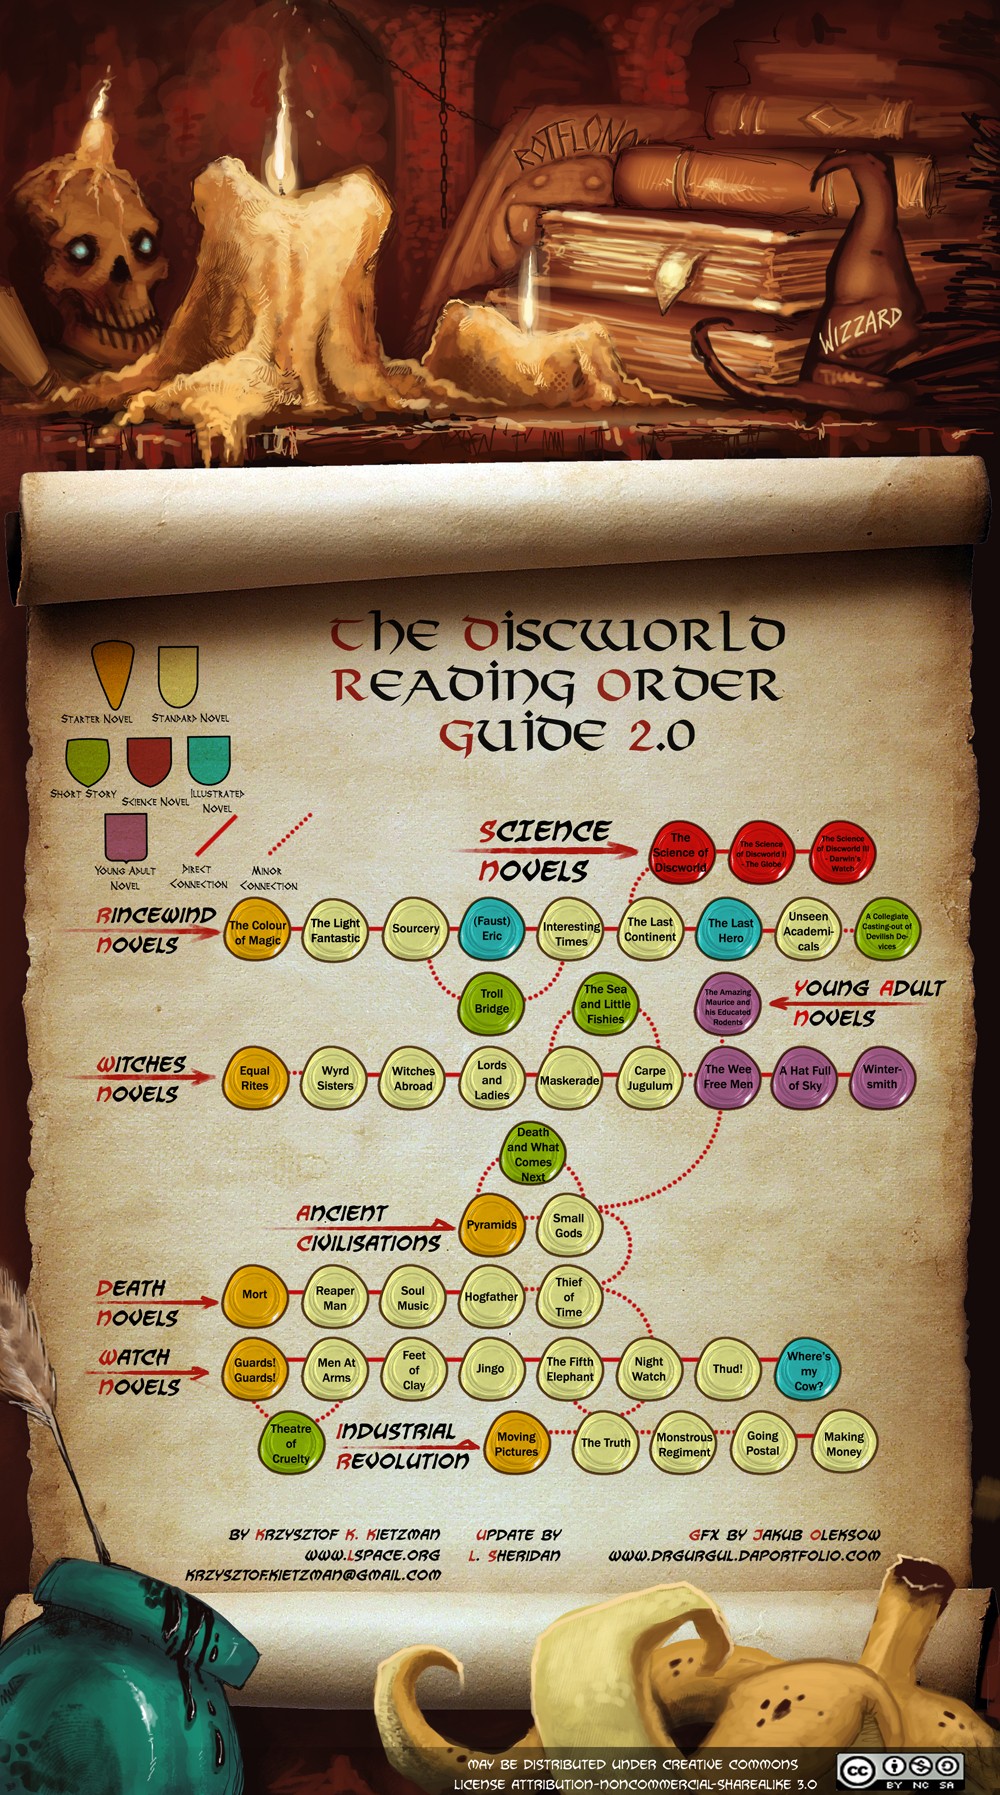 Discworld Reading order v2.0 (all credits to lspace.org)